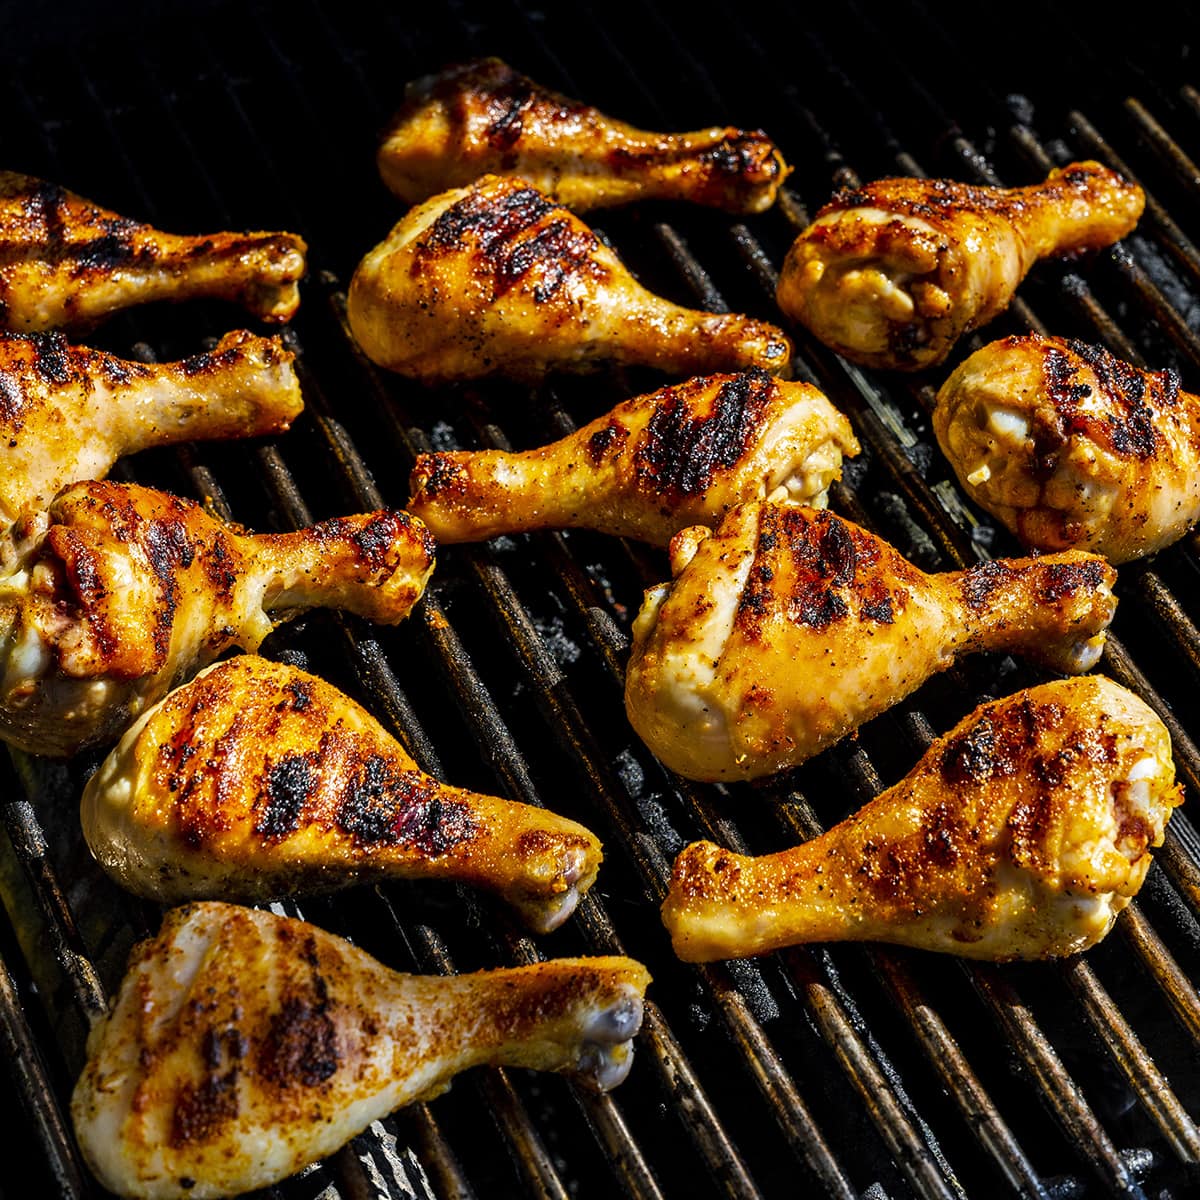 Grilled chicken legs cooked on the grill.